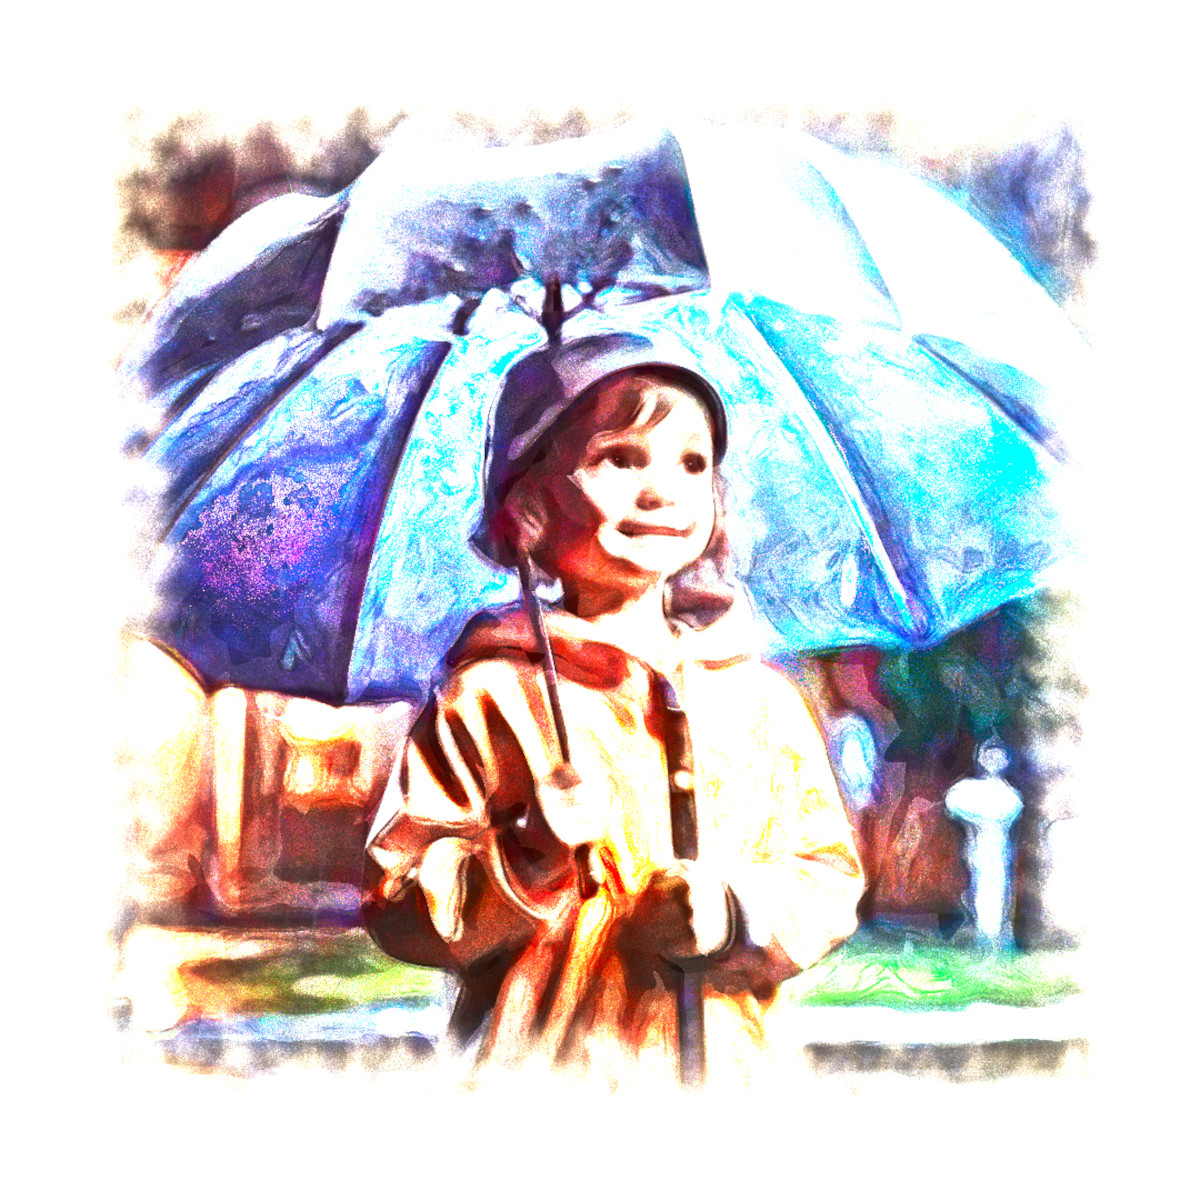 2023-10-01 10-56-13 child-8160860 with a Watercolor Pastels Effect 2023 (4.0,75.0,32.0,50.0,10.0,8.0,75.0,False,1).jpg